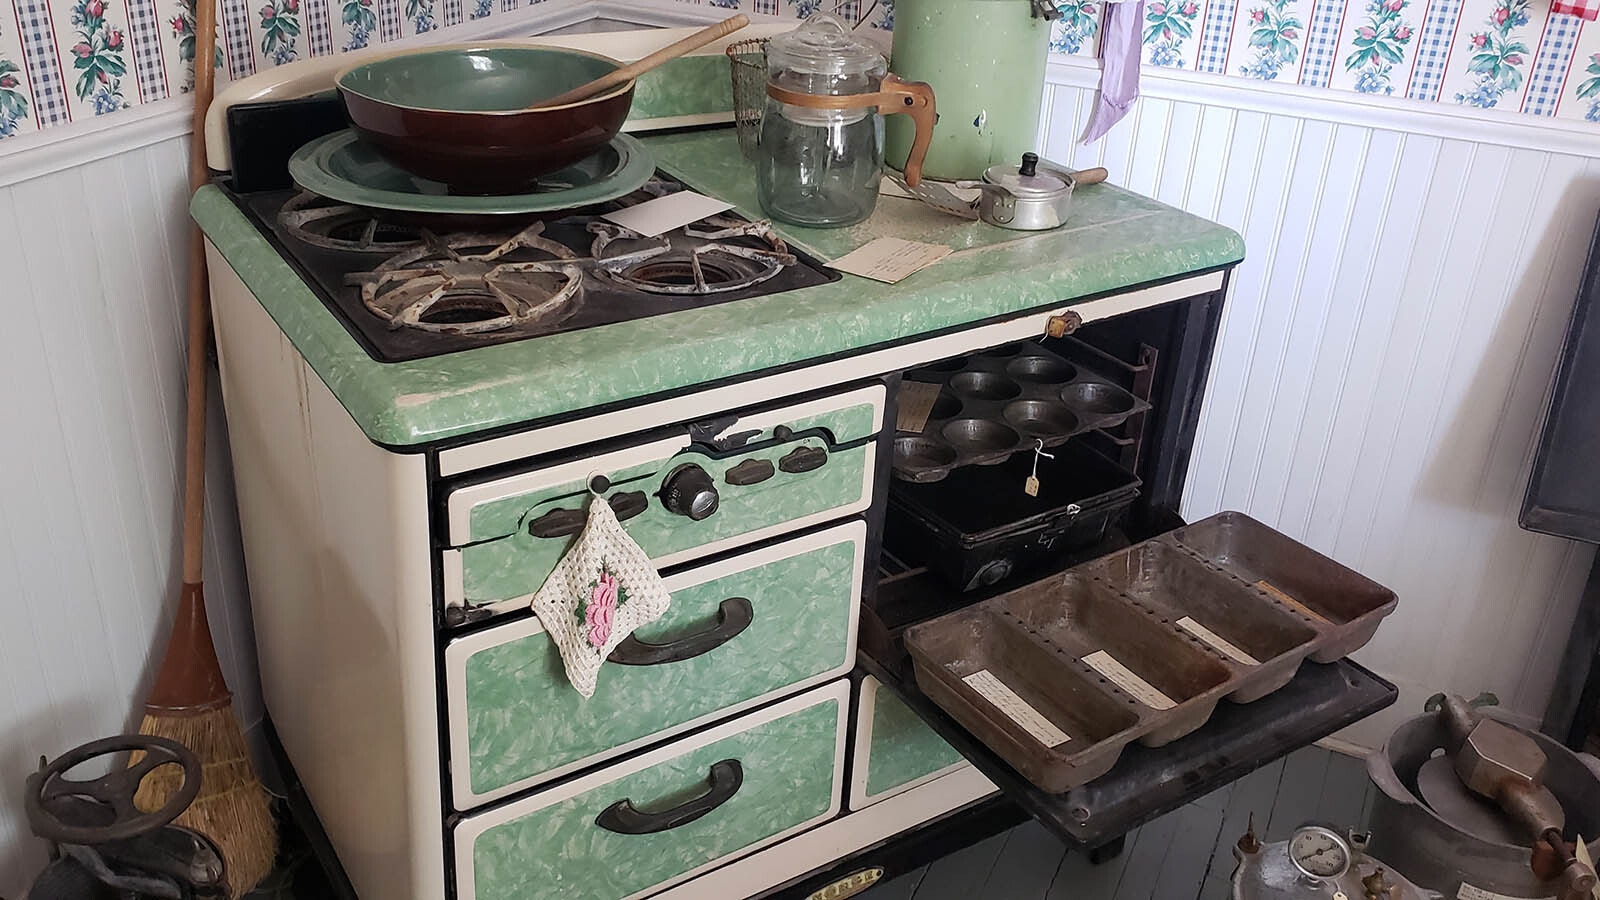 A typical period kitchen.